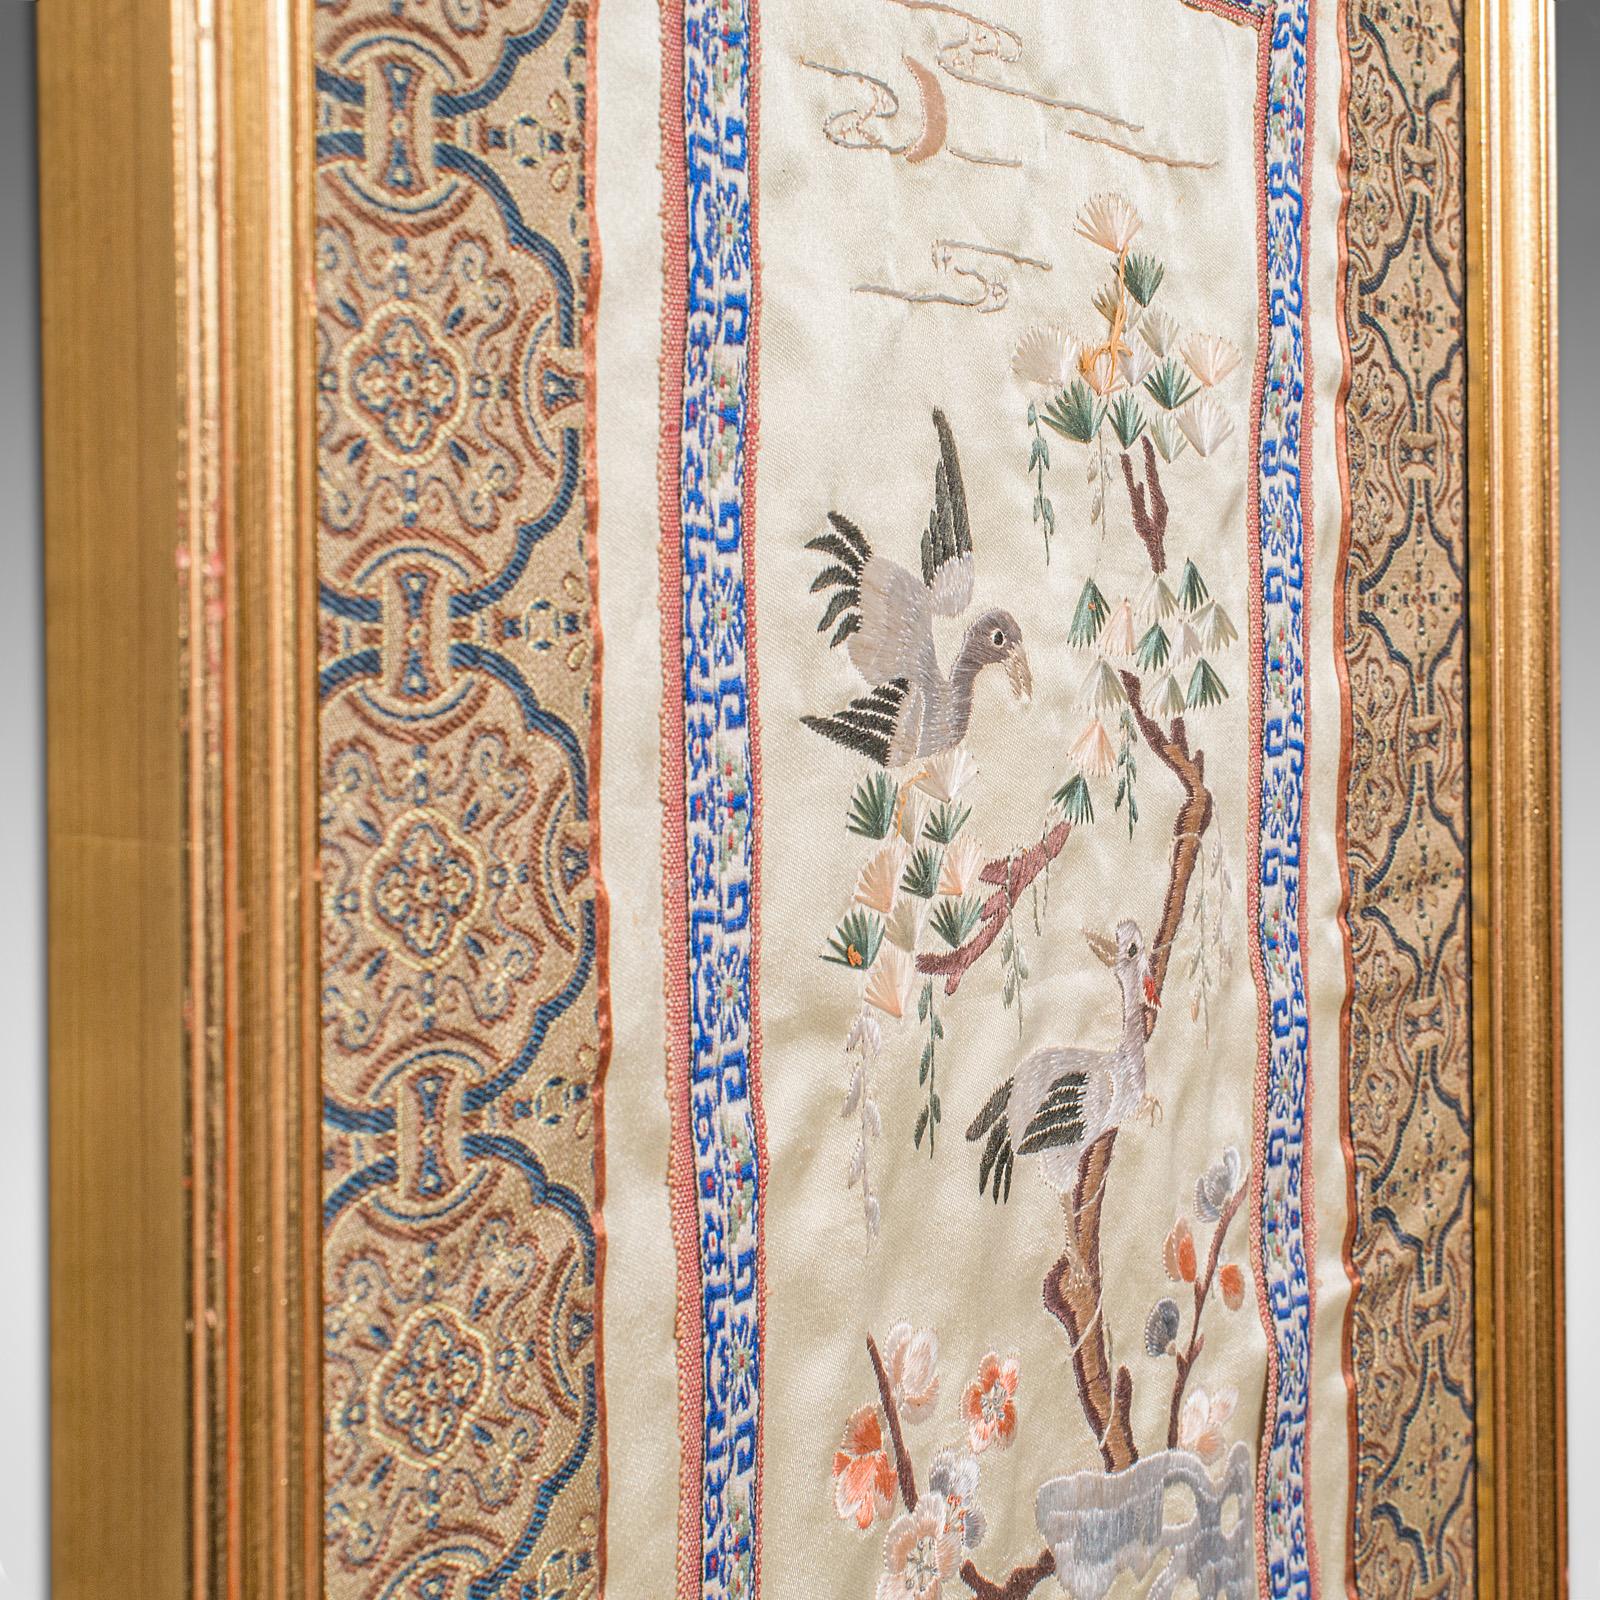 19th Century Antique Decorative Panel, Japanese, Framed, Silk Cotton Embroidery, Victorian